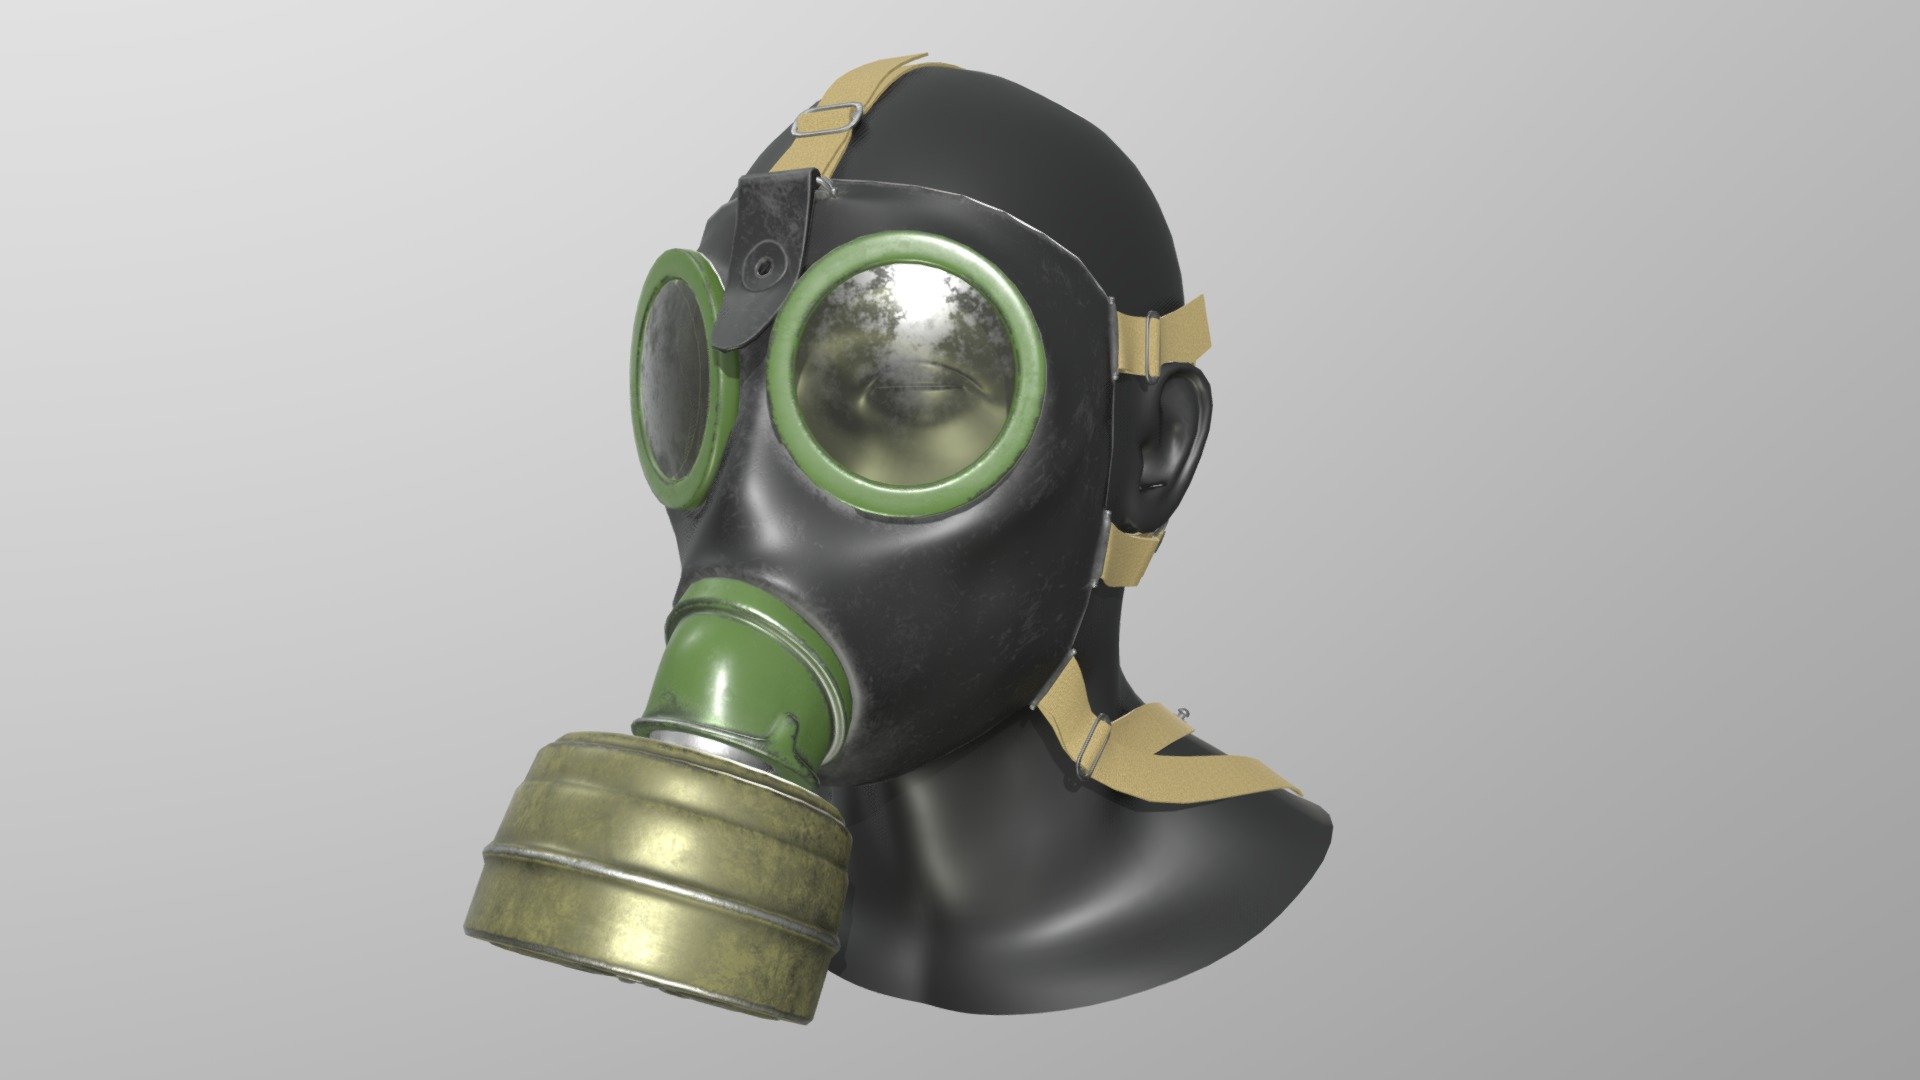 German gas mask of ww2 period.
Only exterior modeled.

Update: reduced tri-count from ~30k to ~14k, decreased size of the cheekbones, tried texturing in Substance, still looks like shit.

Head mesh by Alexander Antipov (~15k tris).

Modeled in Blender, textured in Substance Painter 3d model